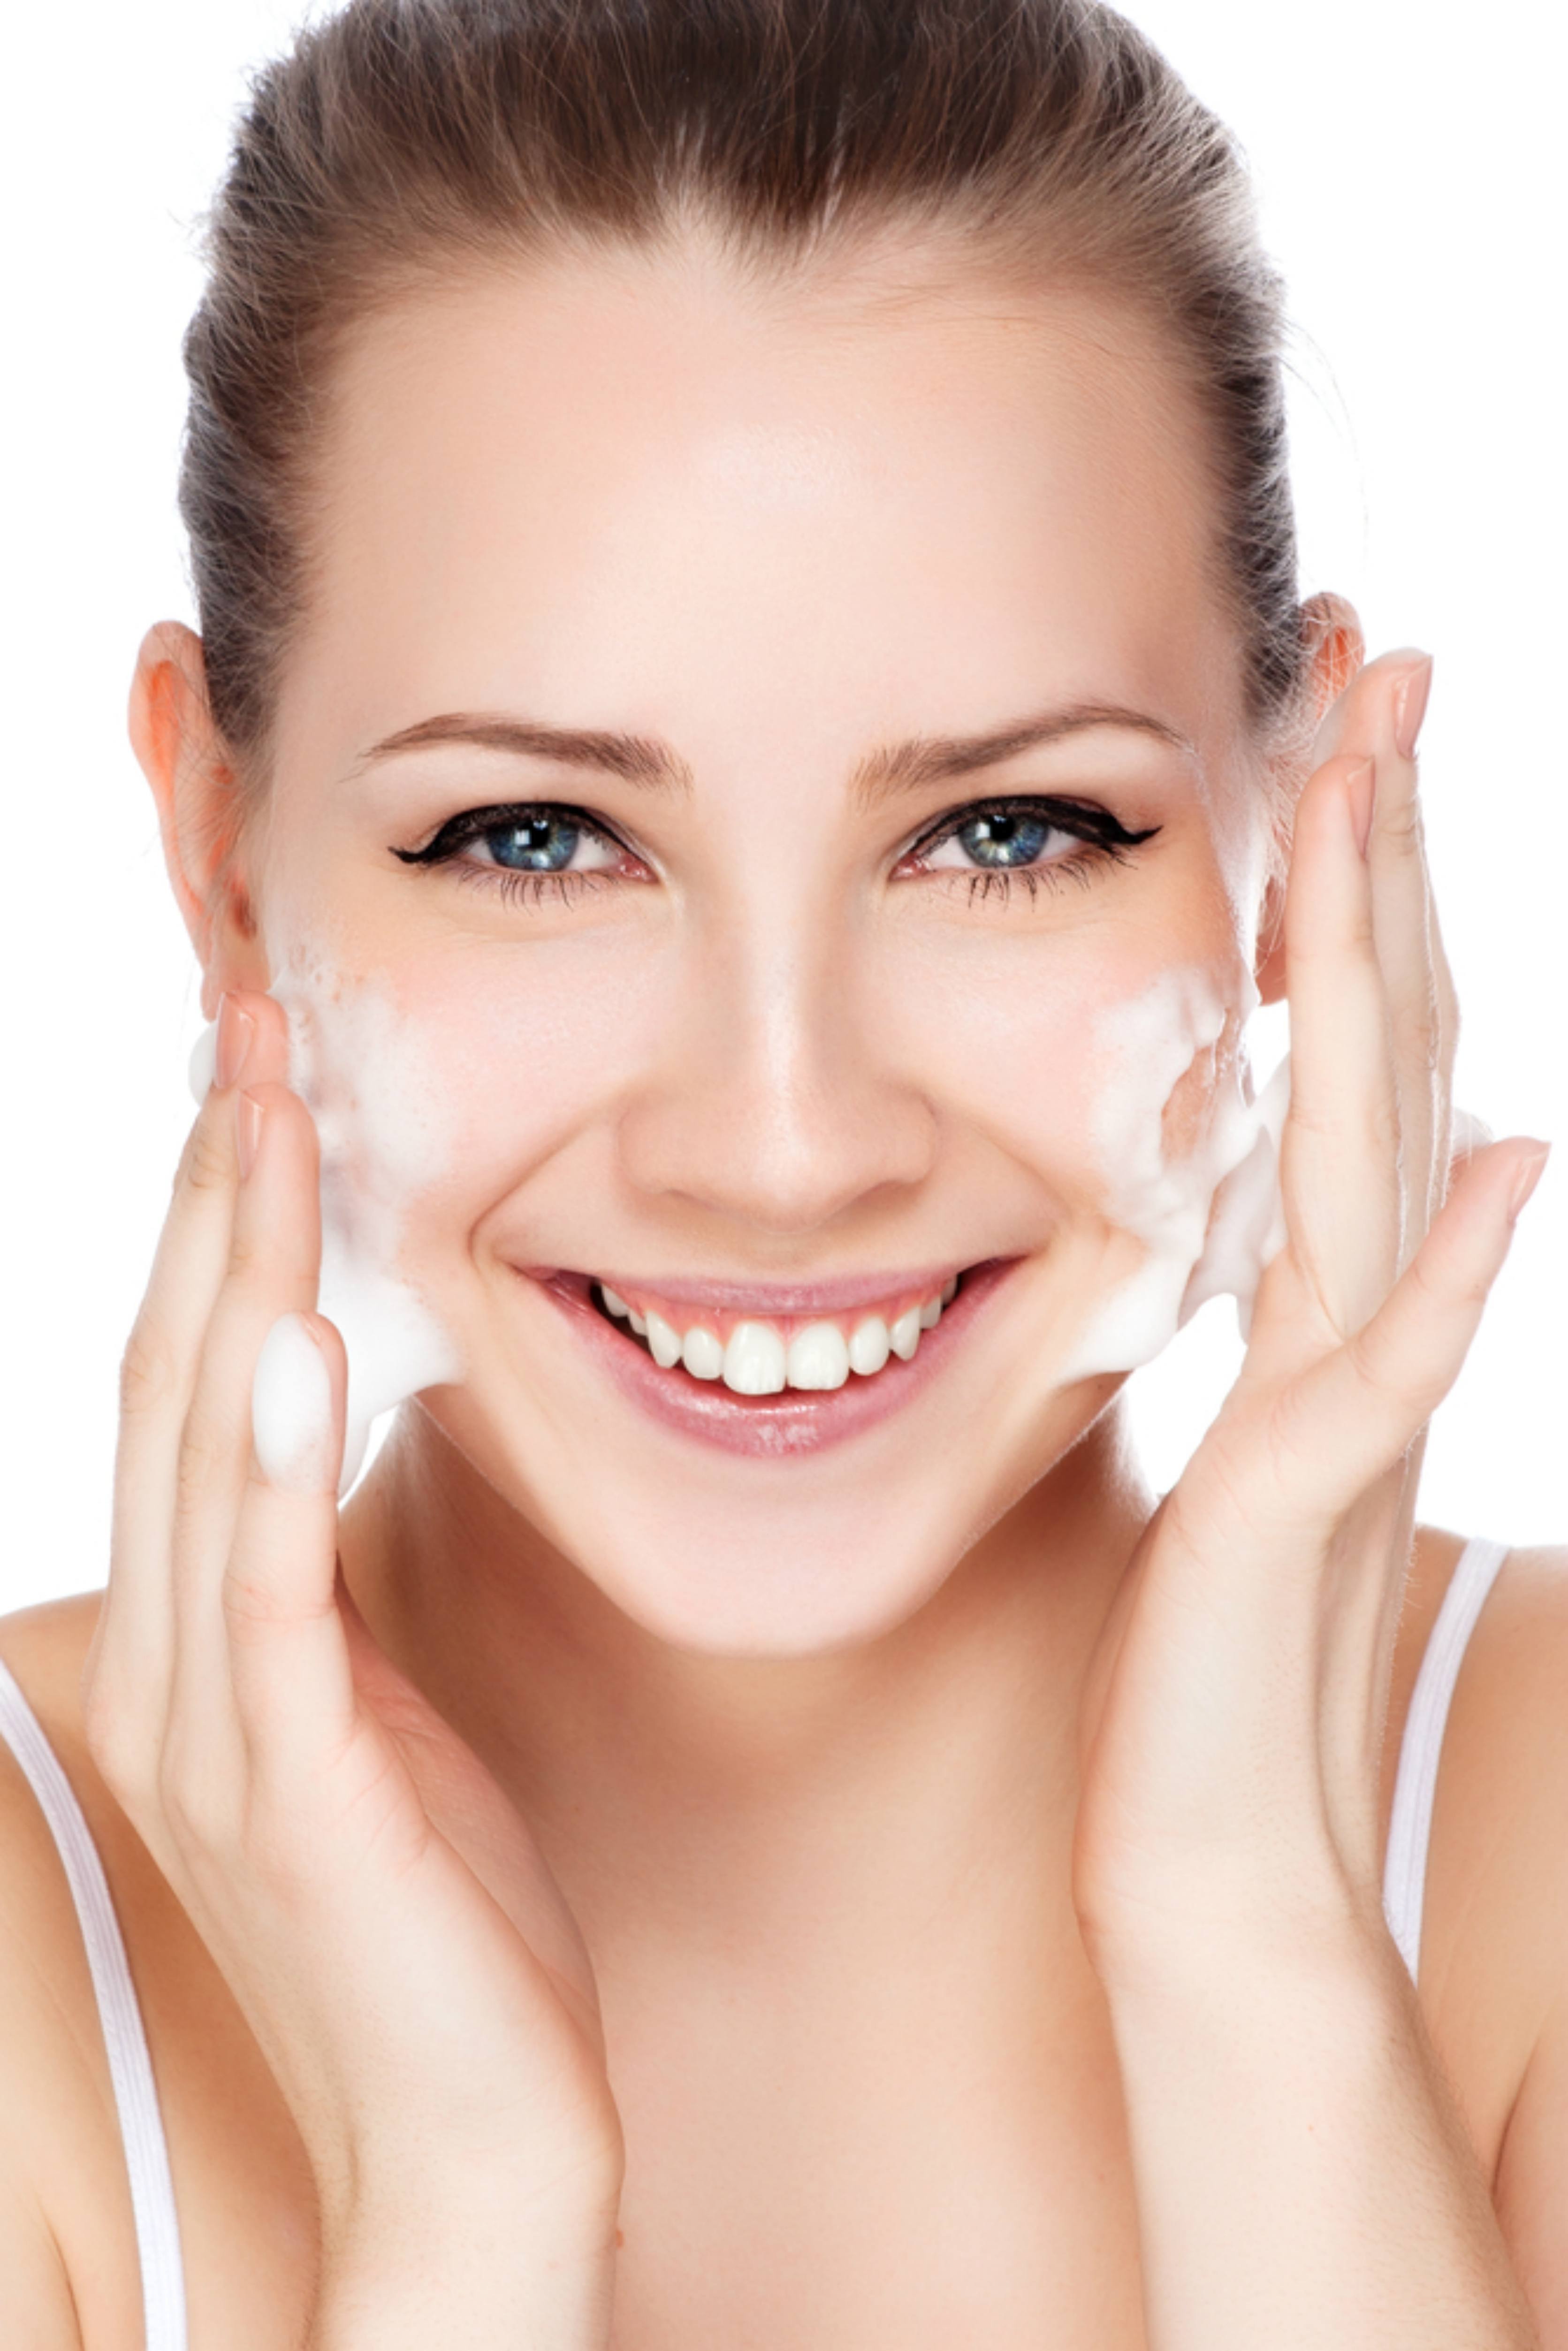 How To Wash Your Face According To Your Skin Type and IMBB recommendations